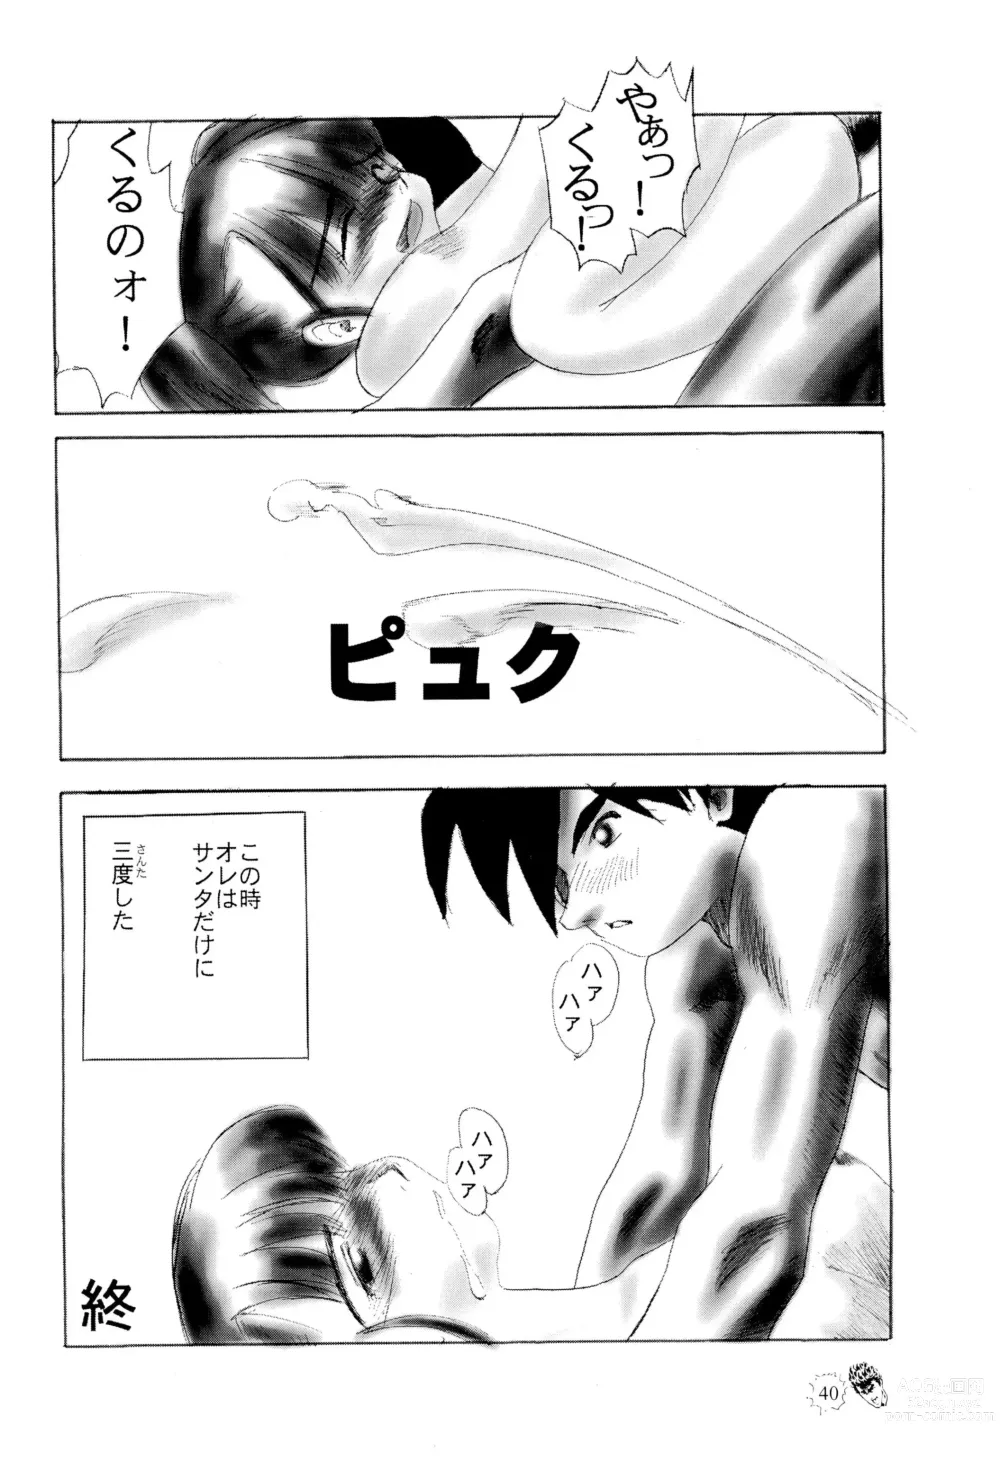 Page 40 of doujinshi CHIBICKERS 4